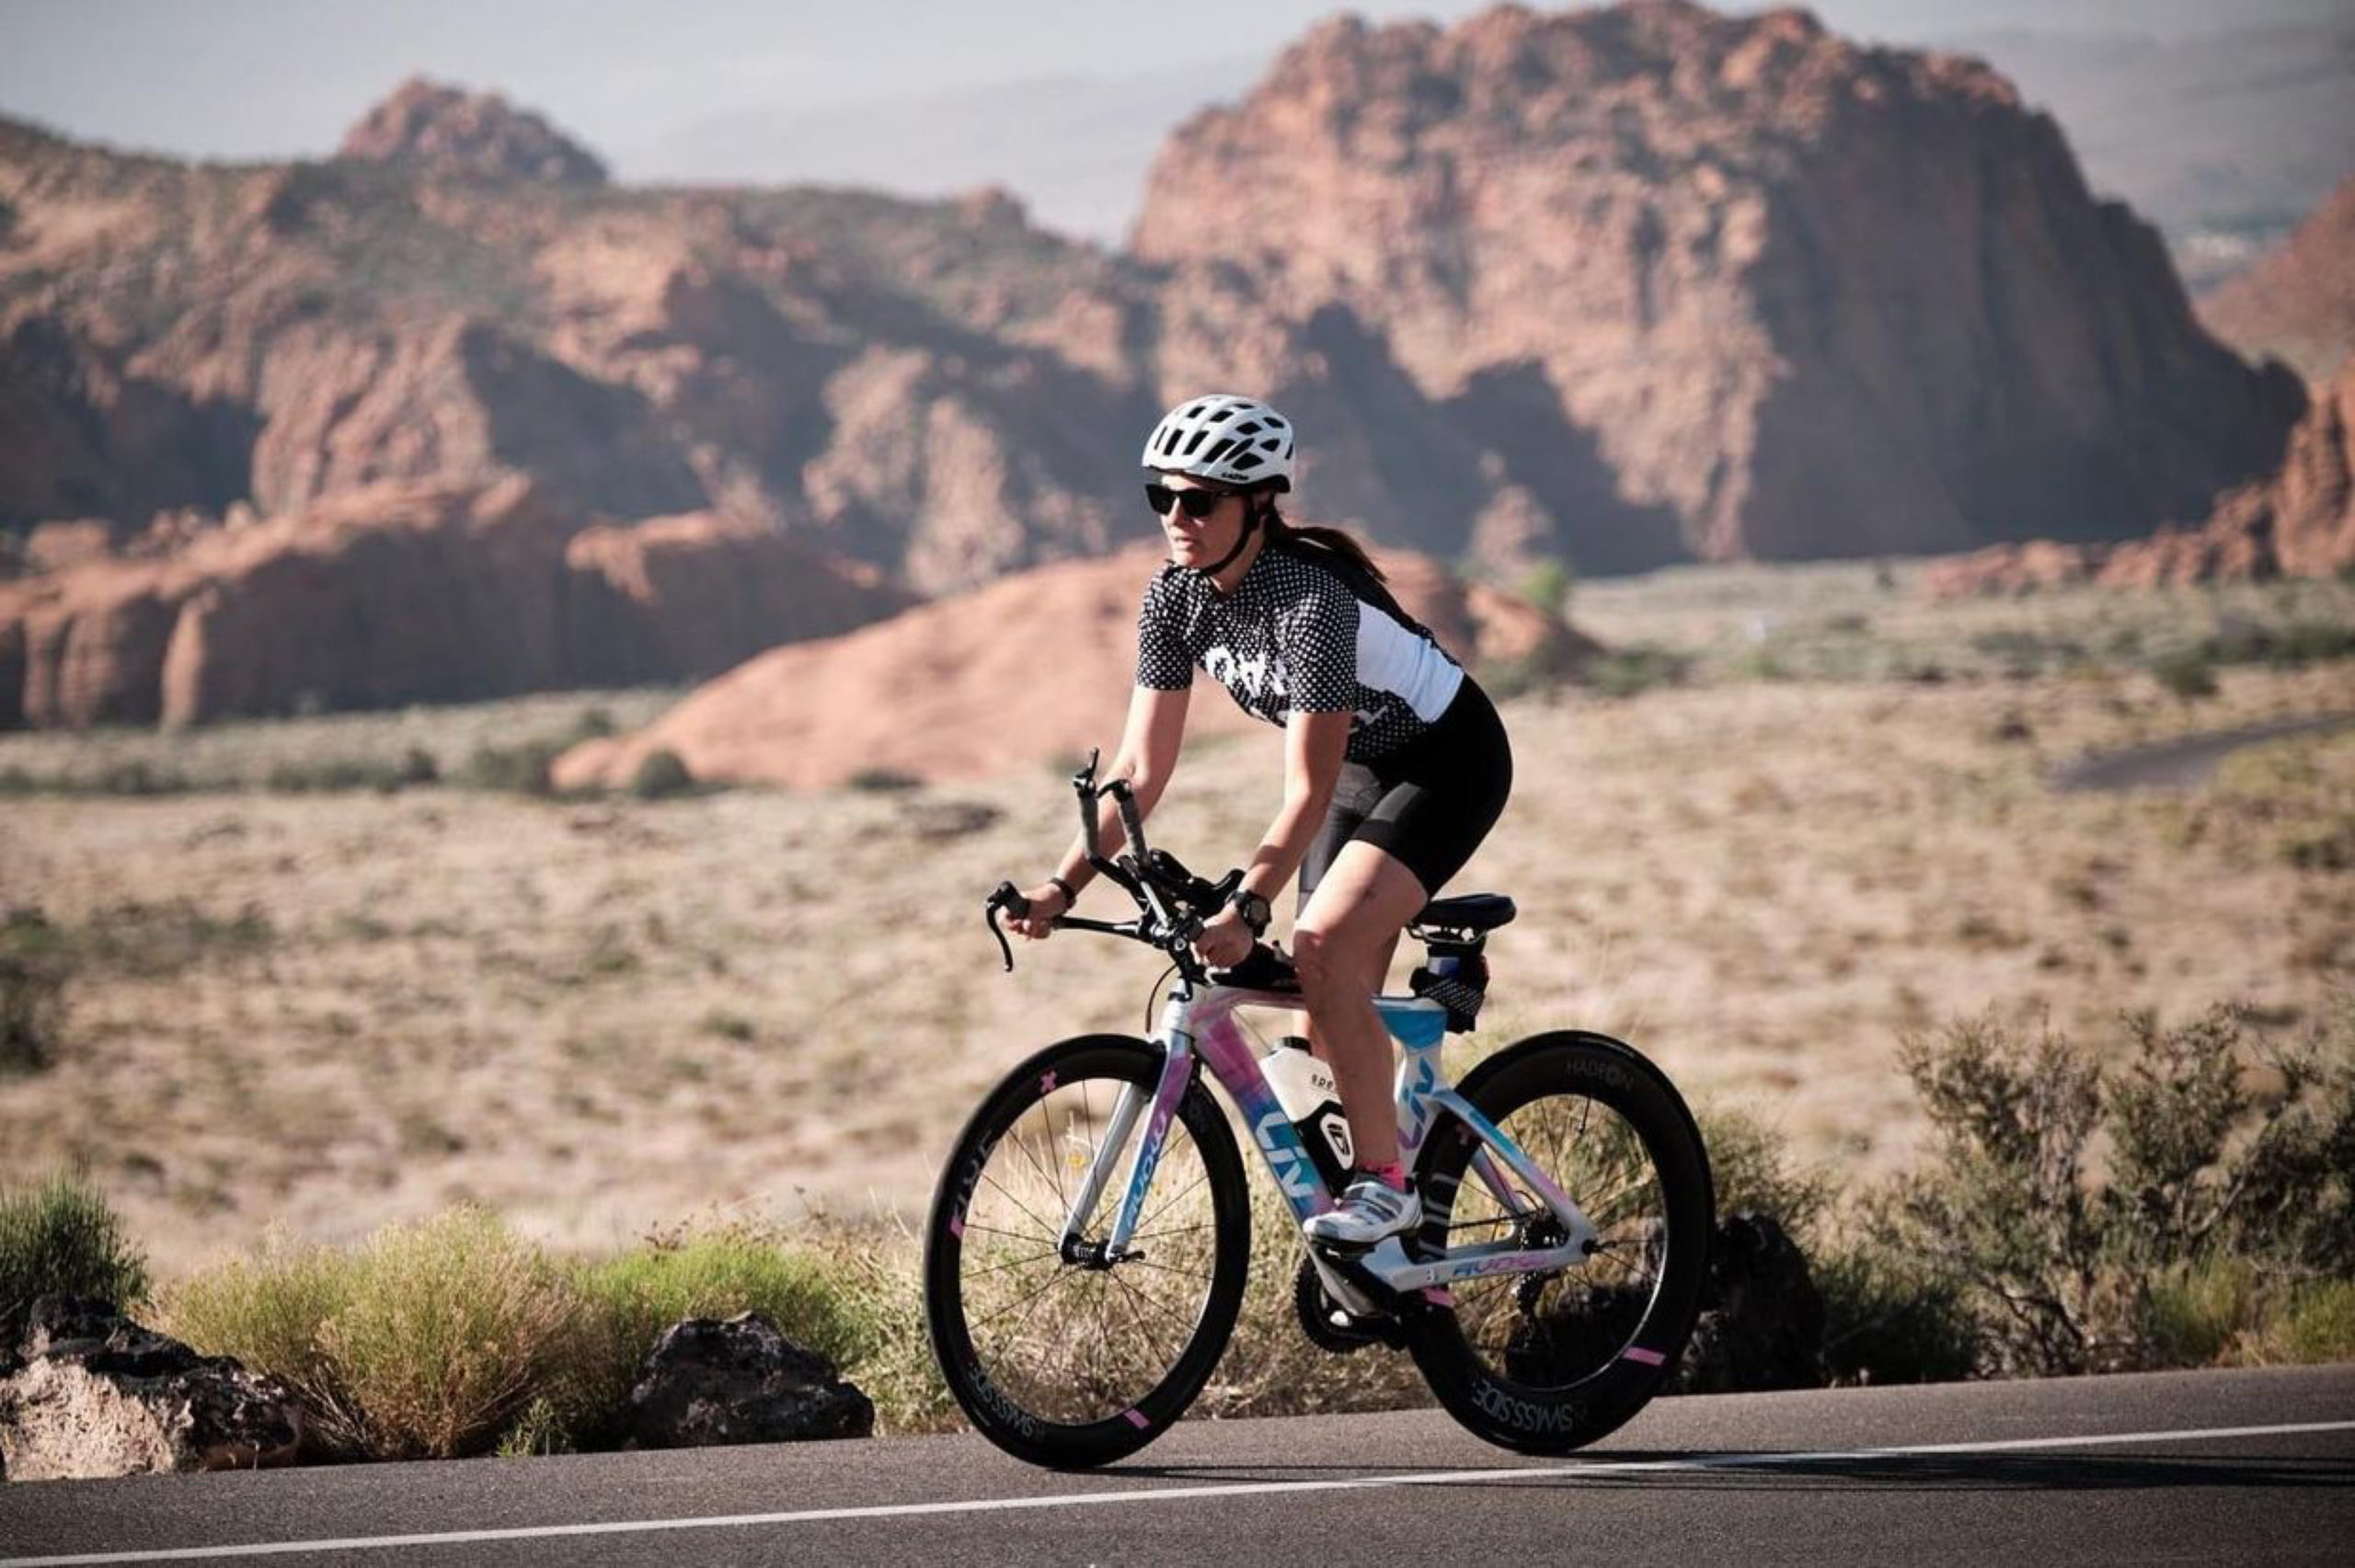 Las Vegas Shooting Survivor and Age Group triathlete Christina Gruber has tackled Some of the most challenging situations, fast downhill descents is just one.